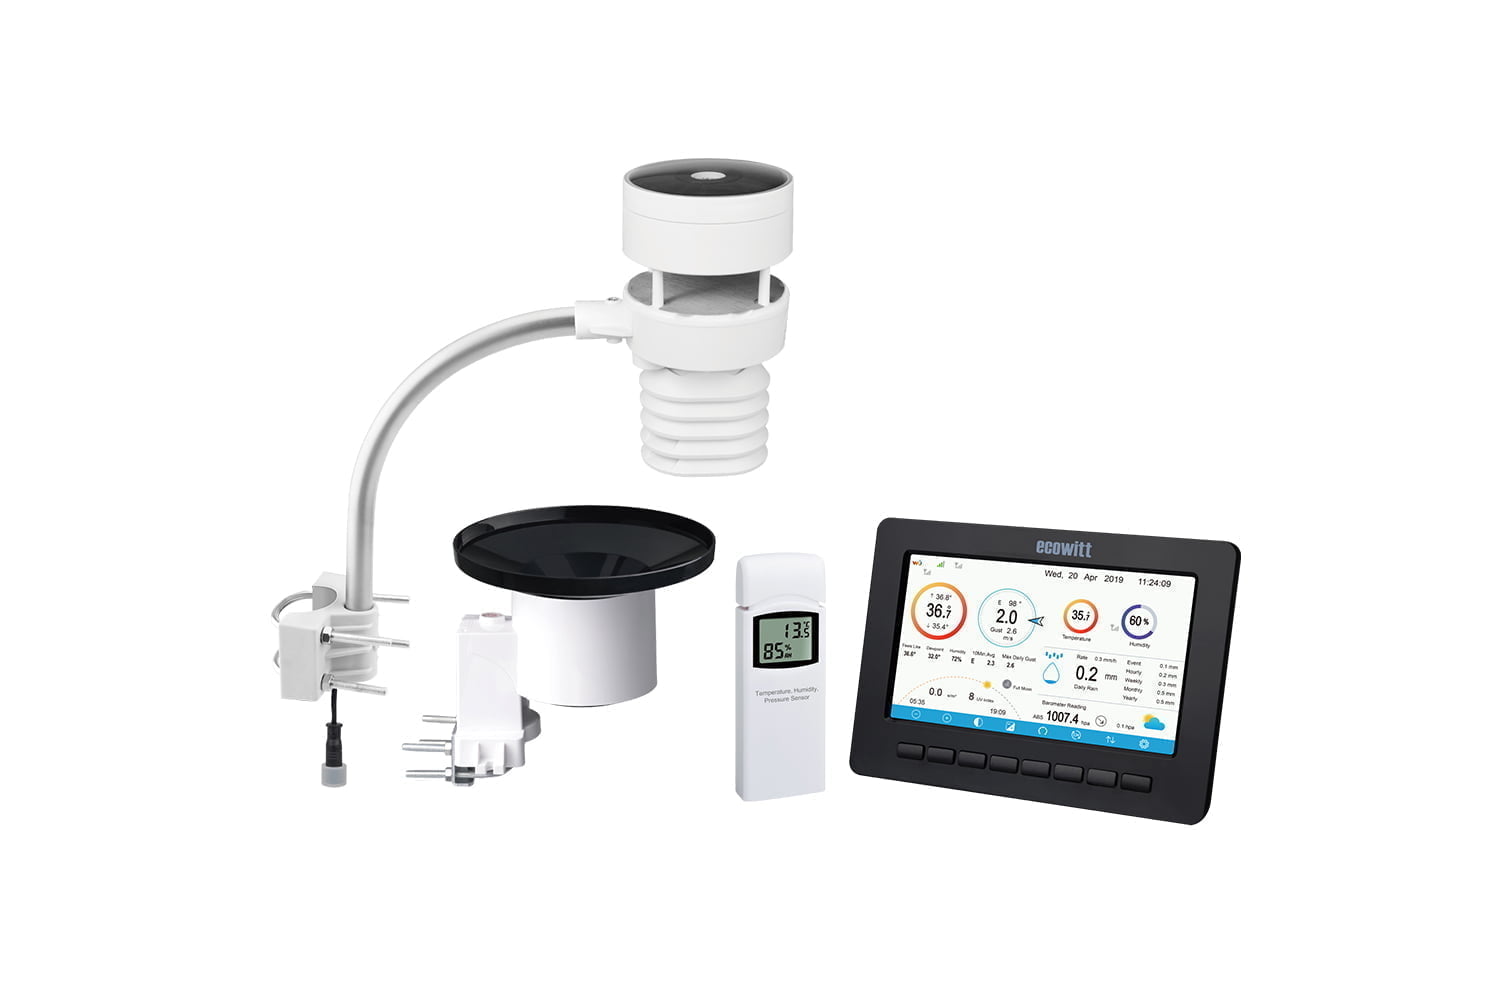 ecowitt weather station HP2553